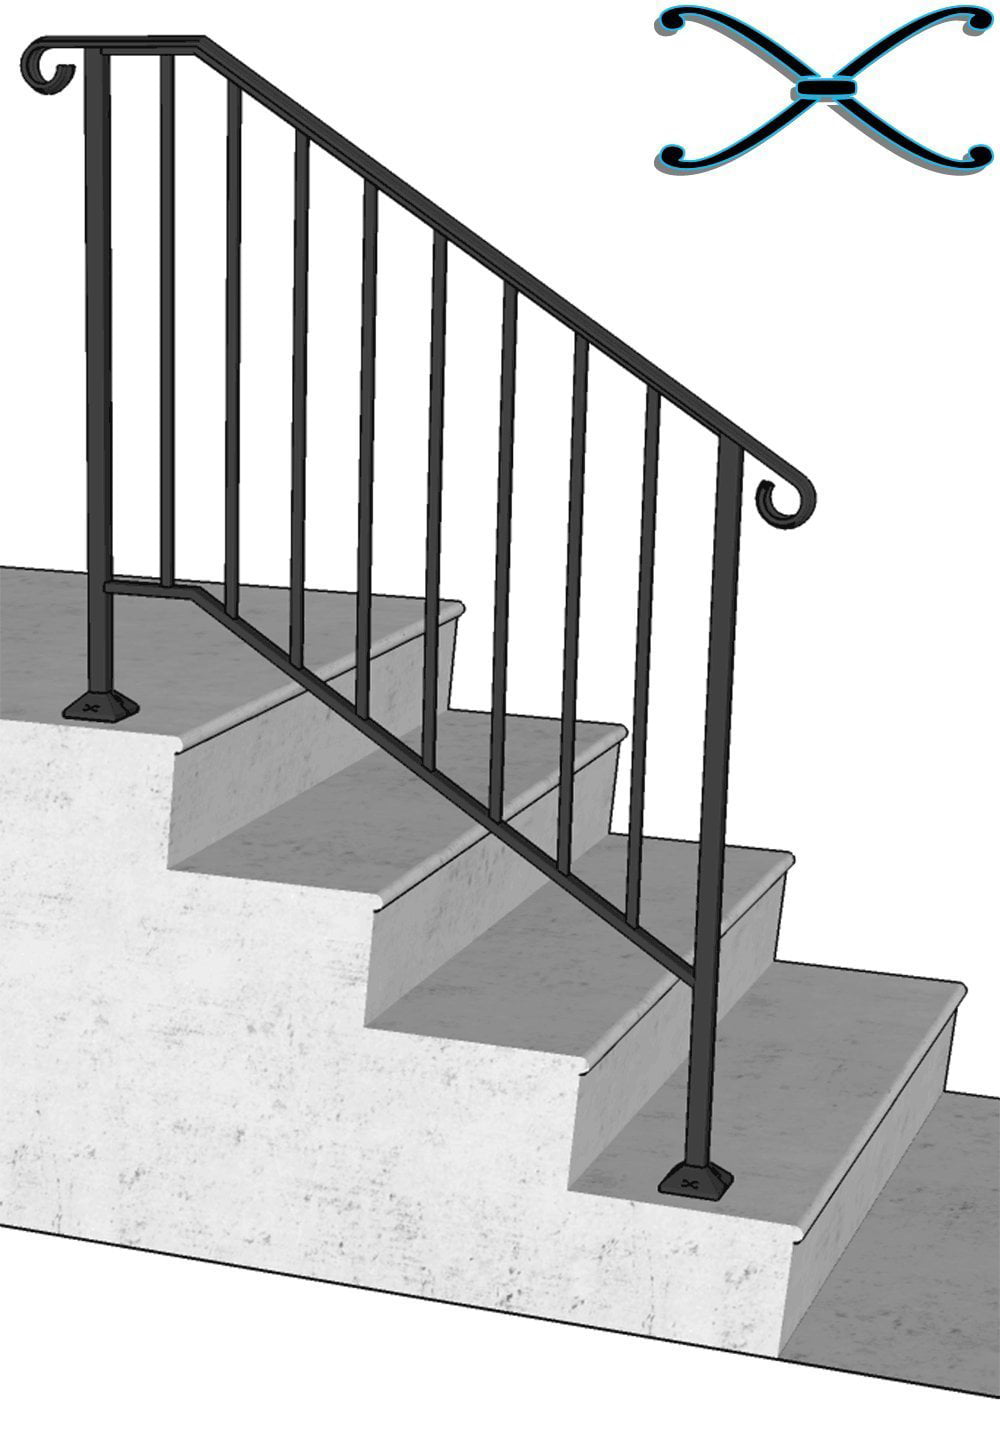 Adjustable Handrail,Handrail Picket #2 Fits 2 to 3 Steps Retro Handrail Stair Rail with Installation Kit Hand Rails for Outdoor Steps,Antique Pewter